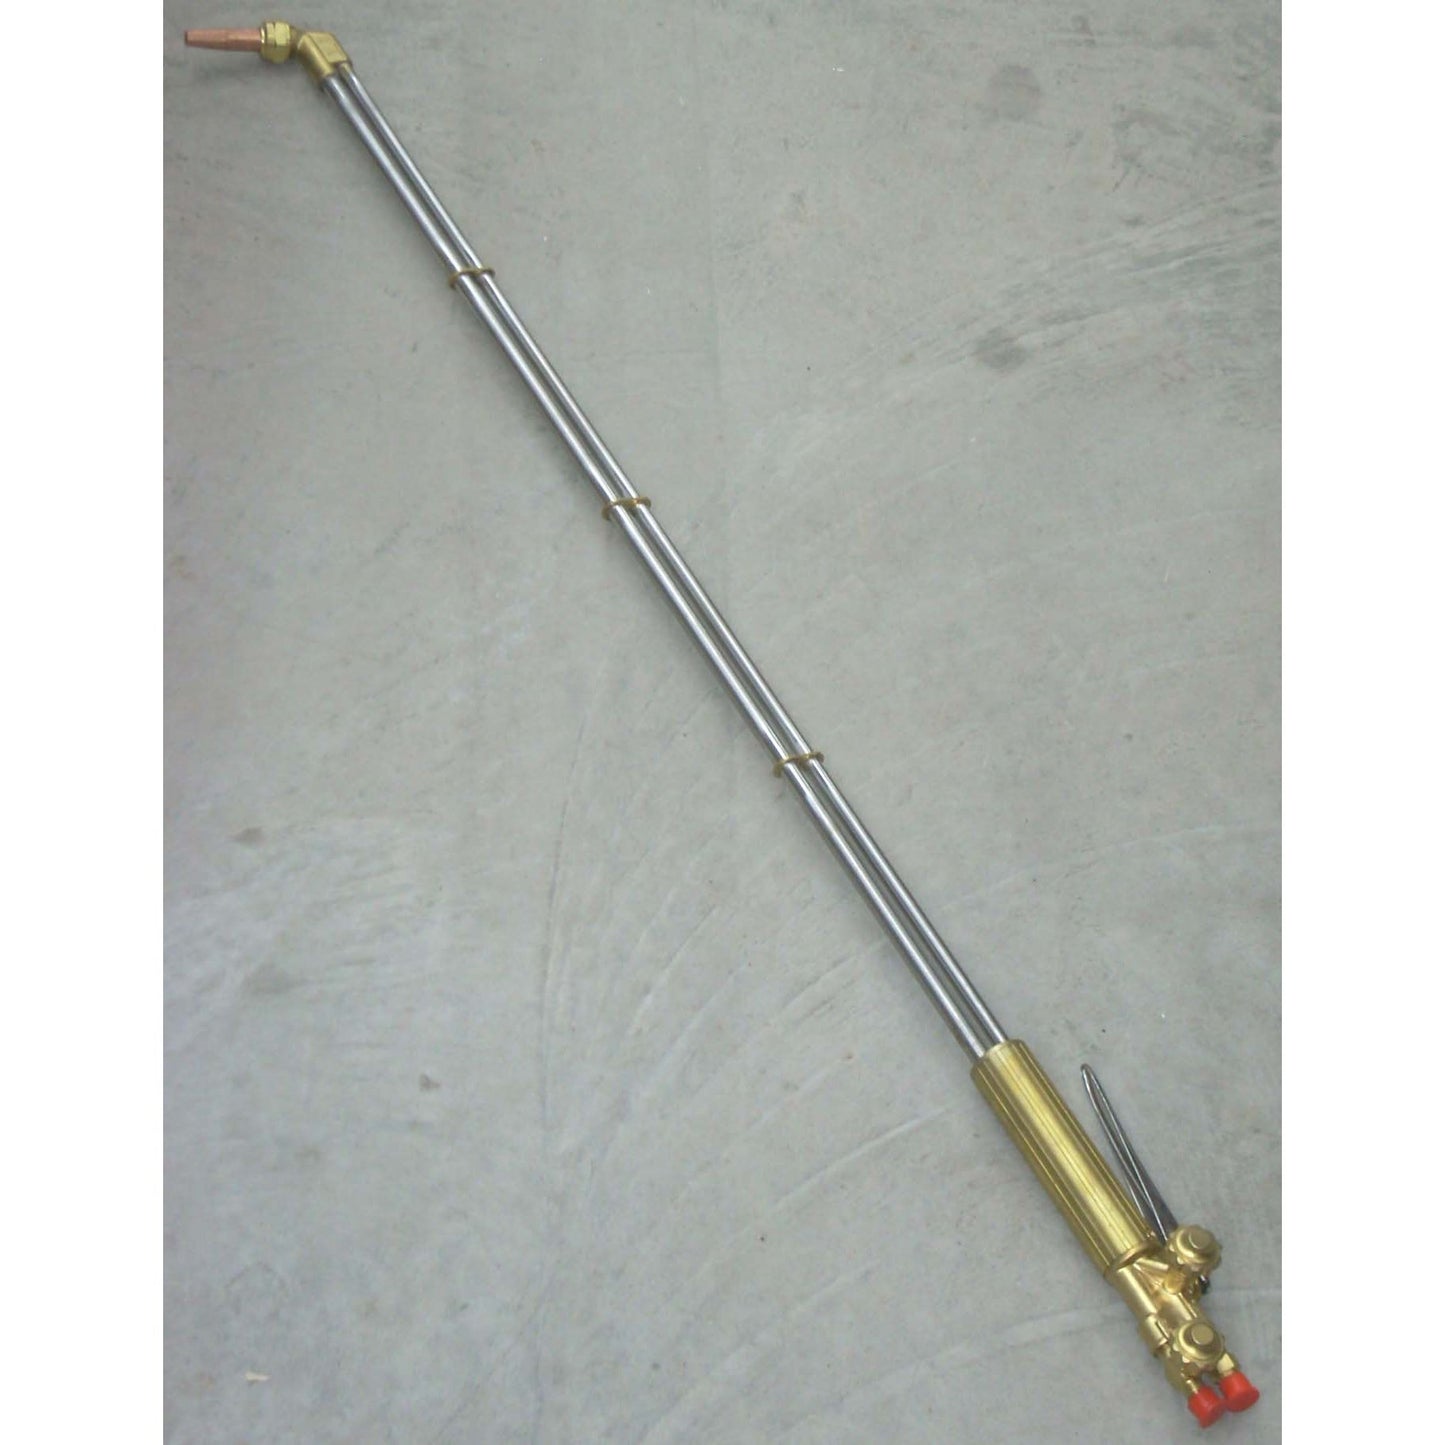 Victor style 48" LP or Propane Cutting Torch 70 Degree